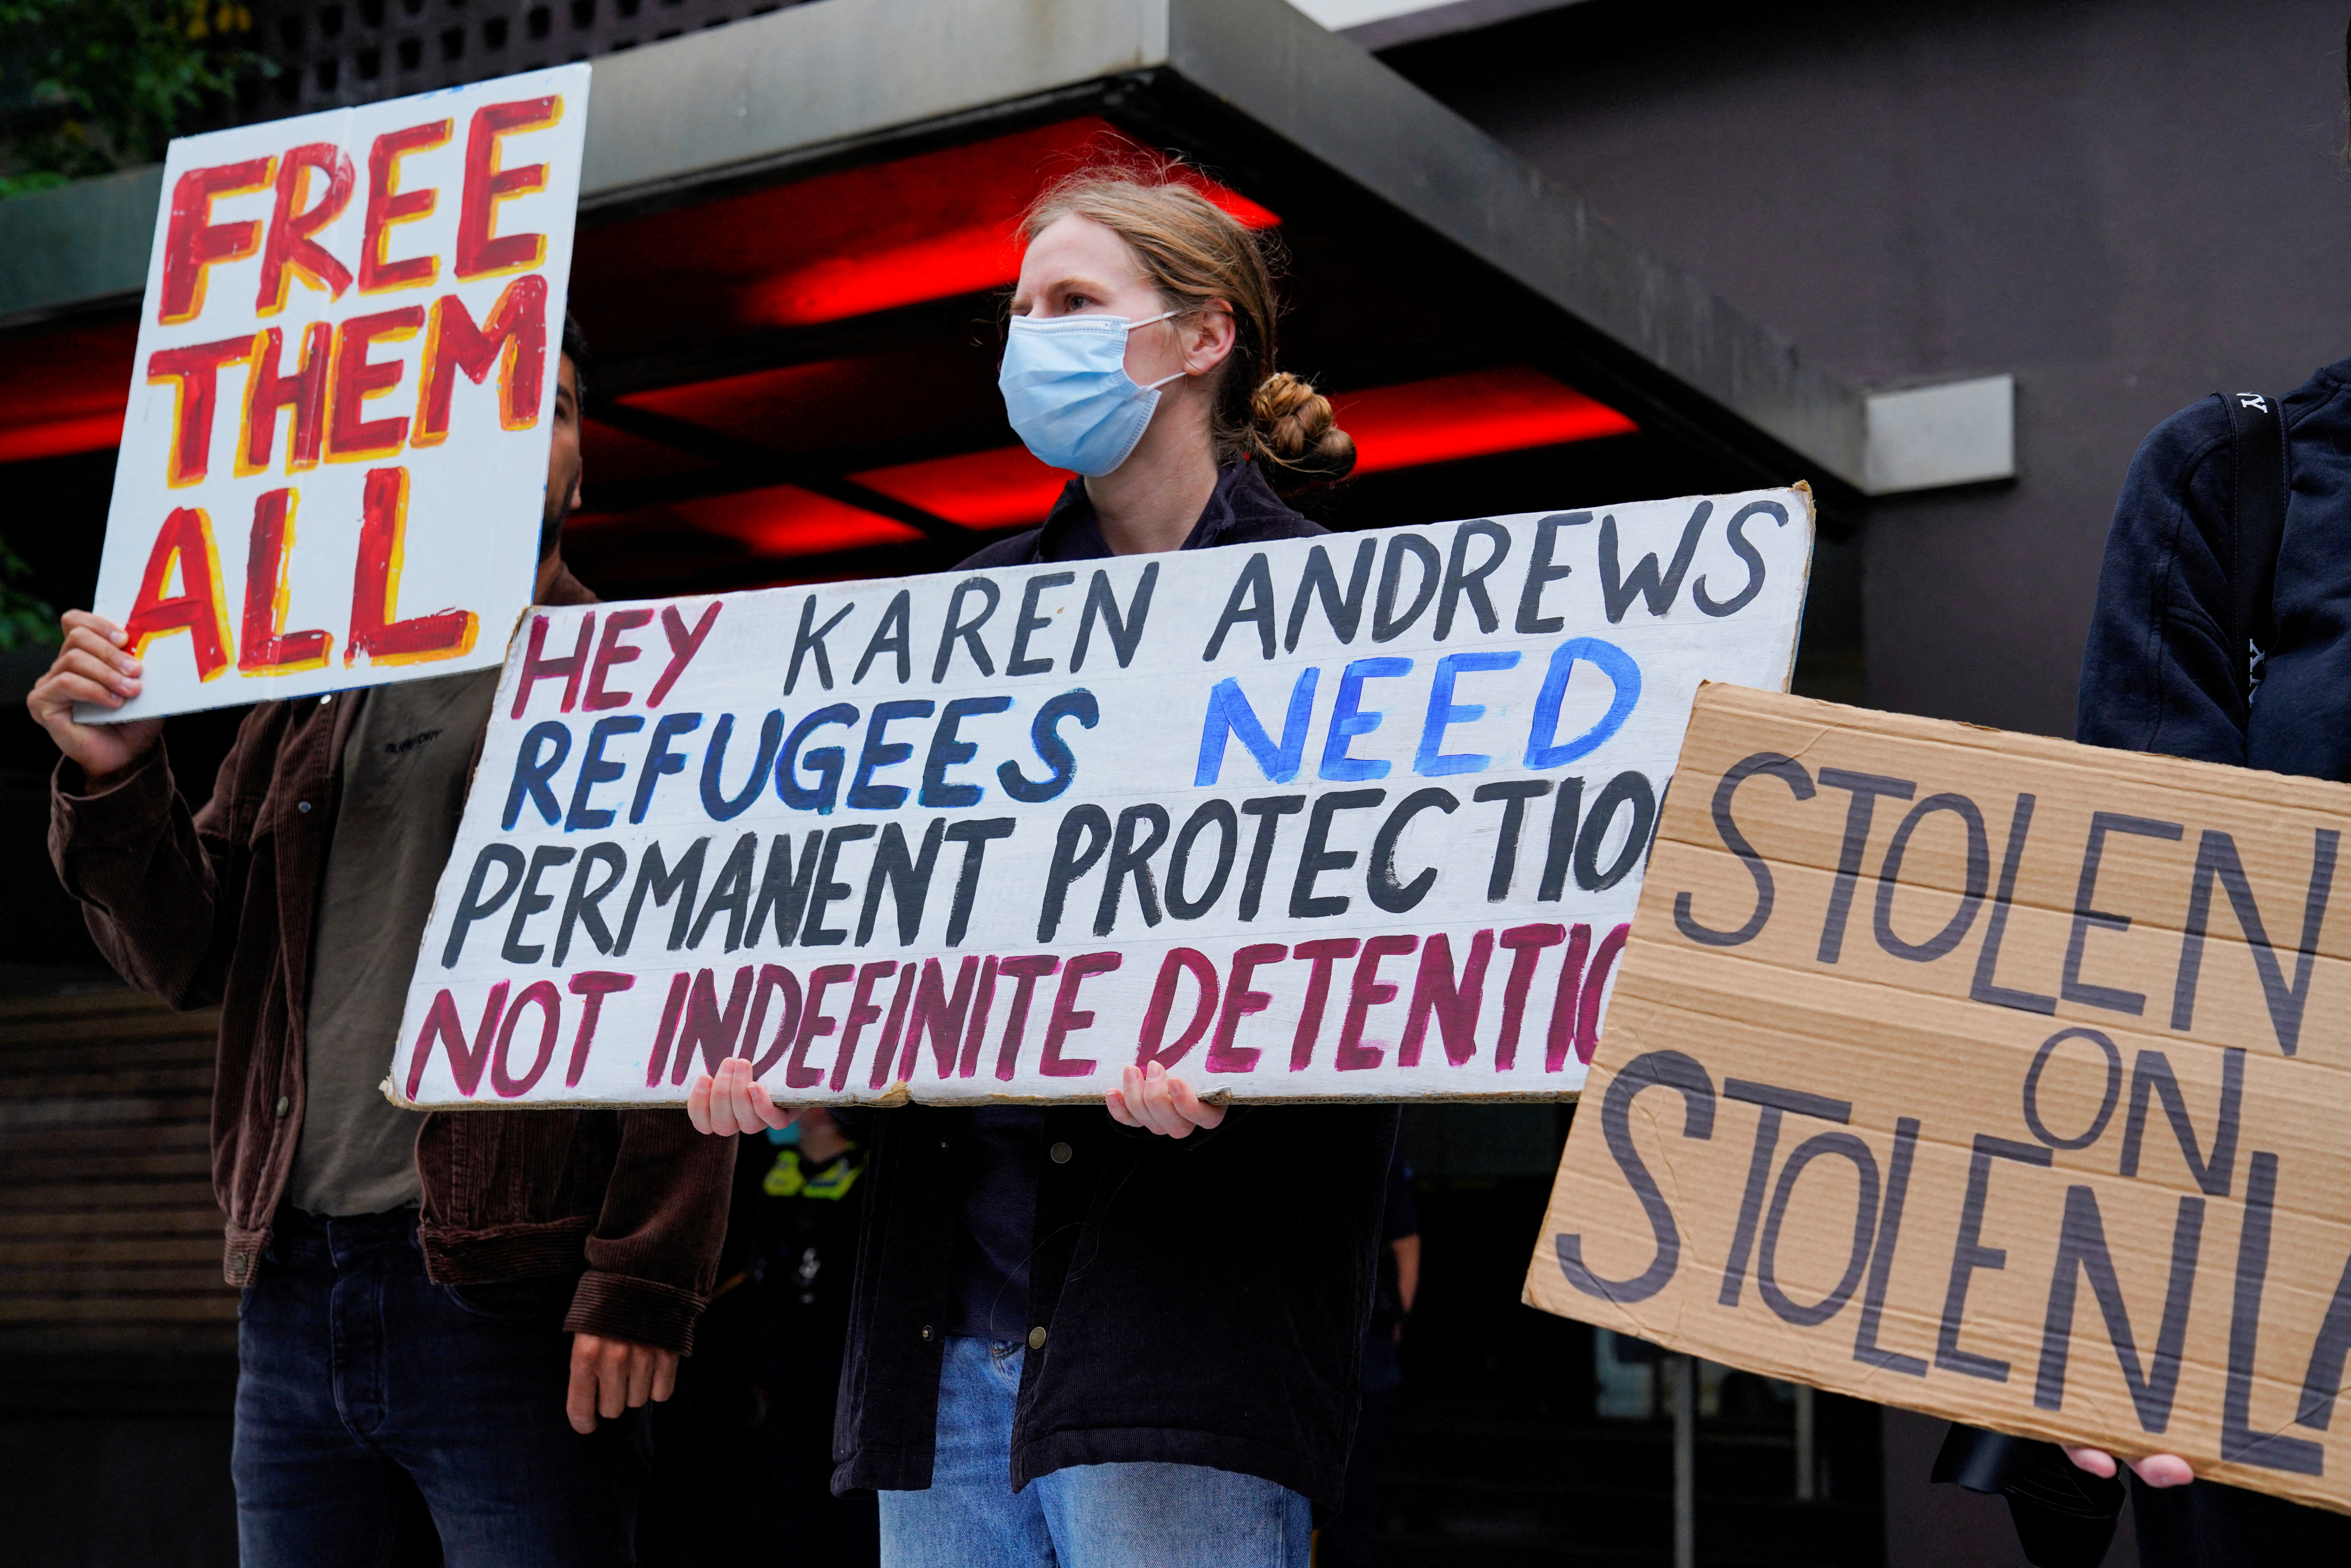 Pro-refugee protestors rally outside the police-guarded Park Hotel, where Serbian tennis player Novak Djokovic is believed to be held while he stays, in Melbourne, Australia, January 10, 2022. REUTERS/Sandra Sanders